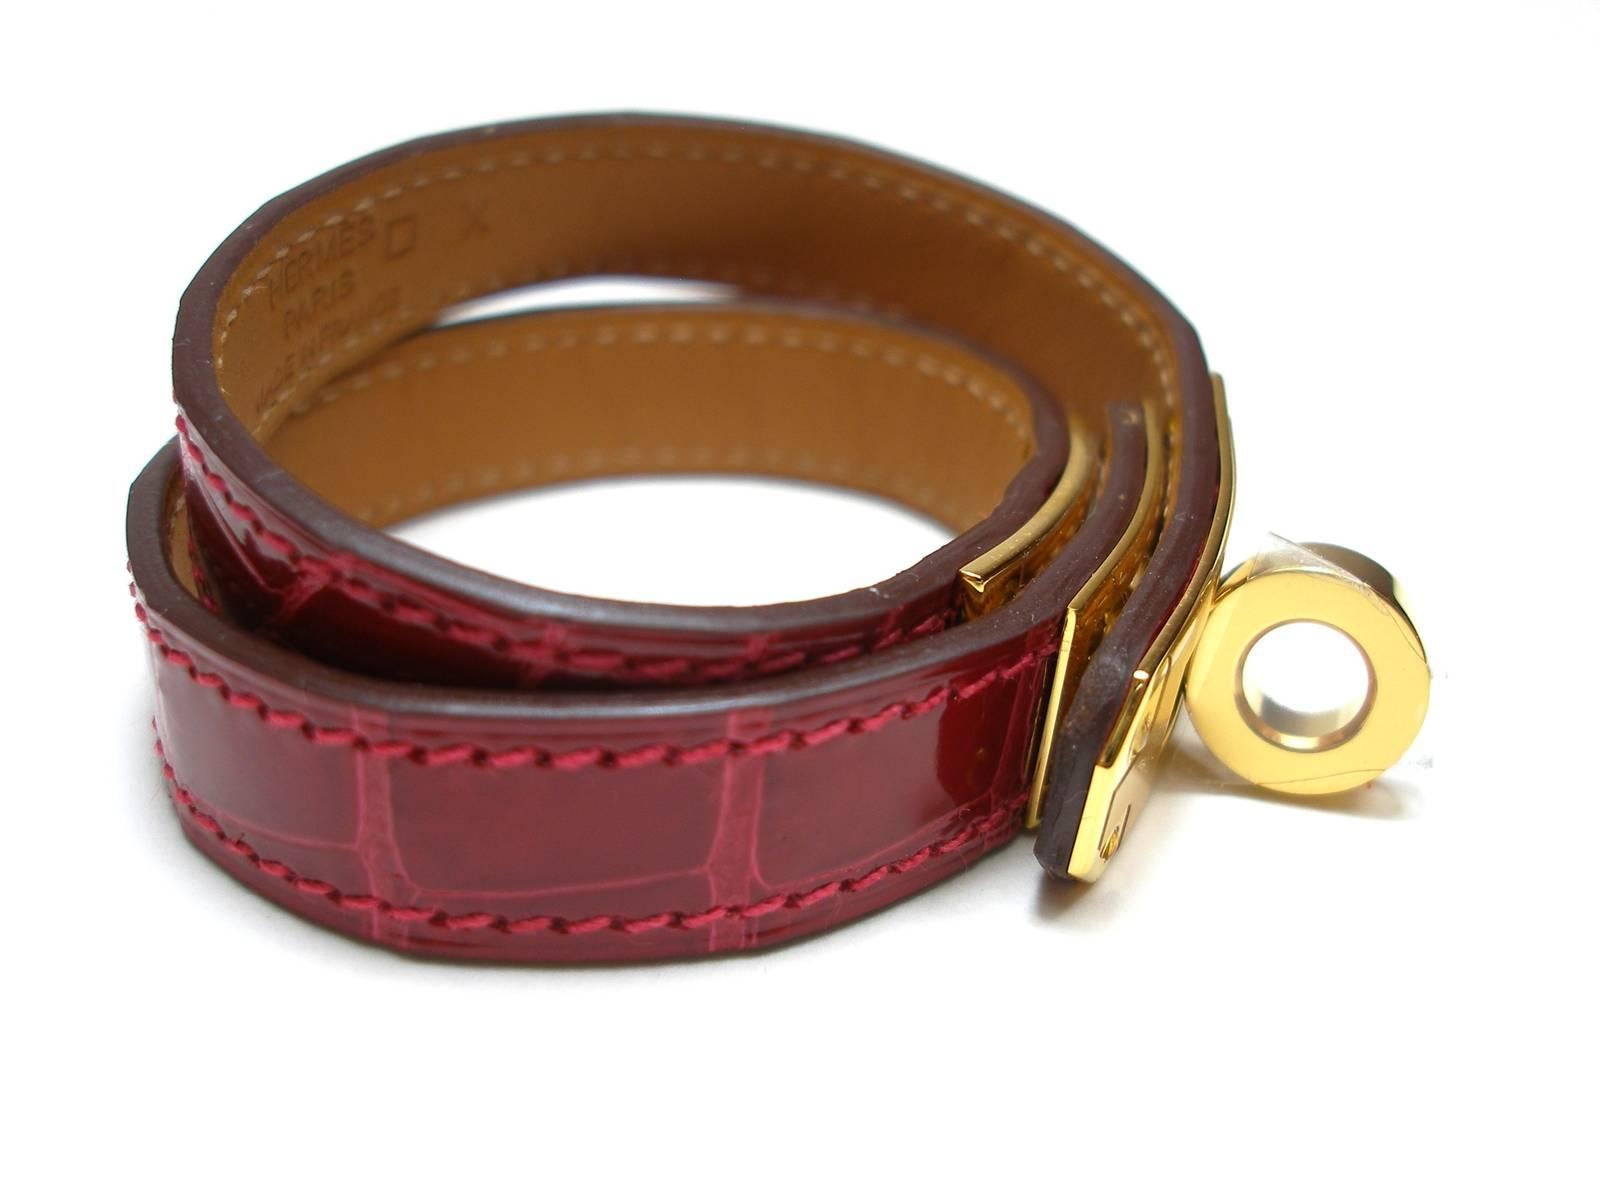 MAGNIFIQUE Hermes Kelly Bracelet 
Exotic leather Alligator
Color : rouge braise 
Hardware in Gold plated 
Inside stamped Hermès Paris 
SMALL SIZE T2 
Fits a wrist small size or 5.5 